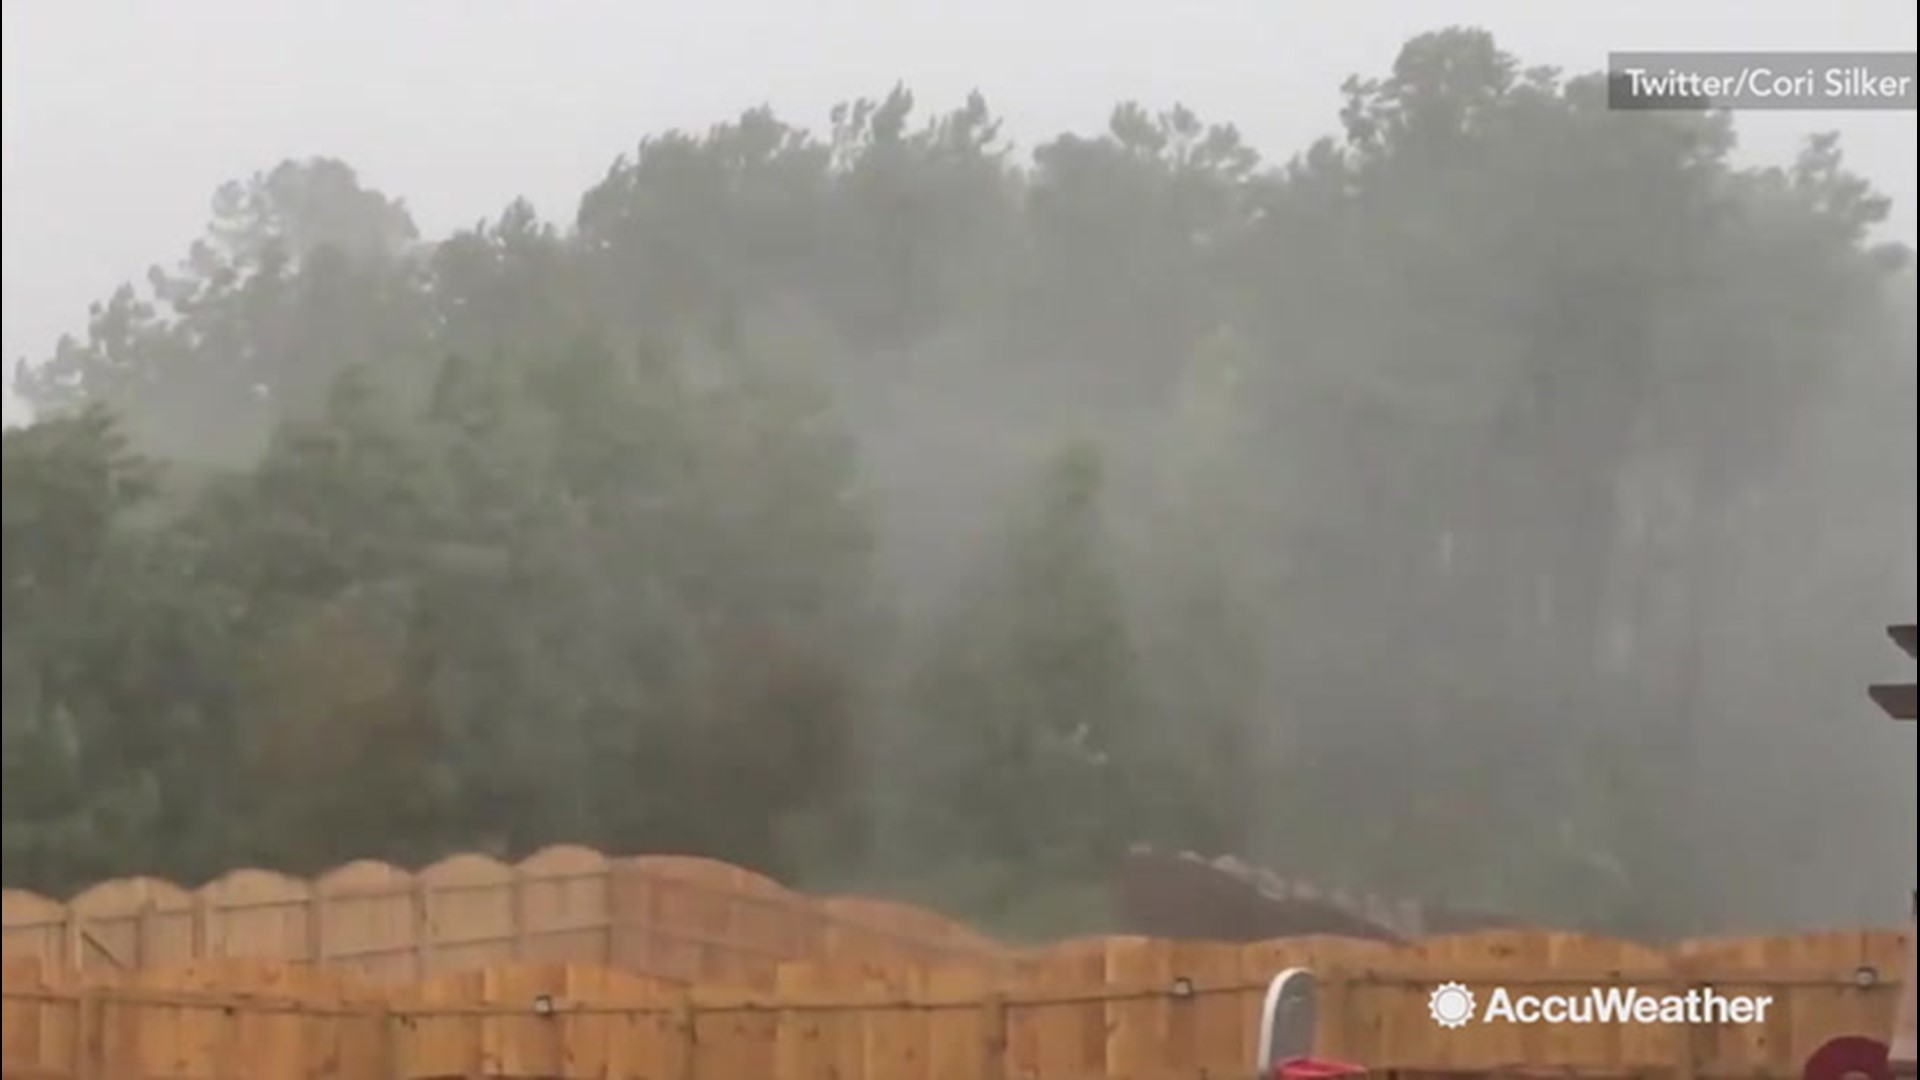 Watch as a relentless torrent of water washed over the town of Wake Forest, North Carolina, on Aug. 22, making for a day that many spent indoors.